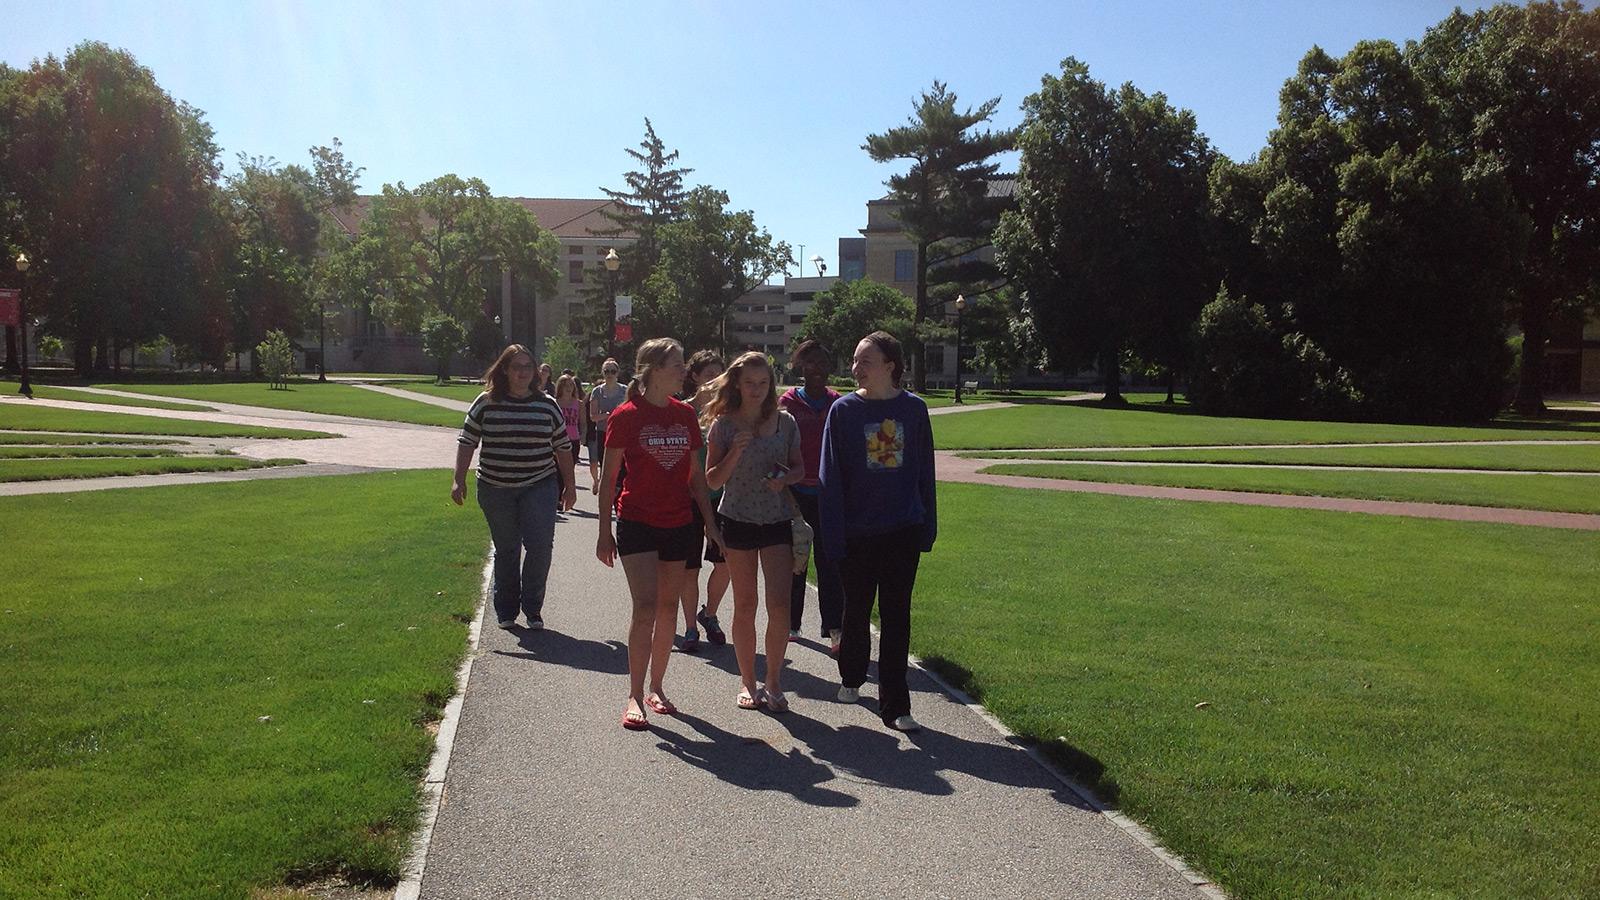 Students walking on campus grounds